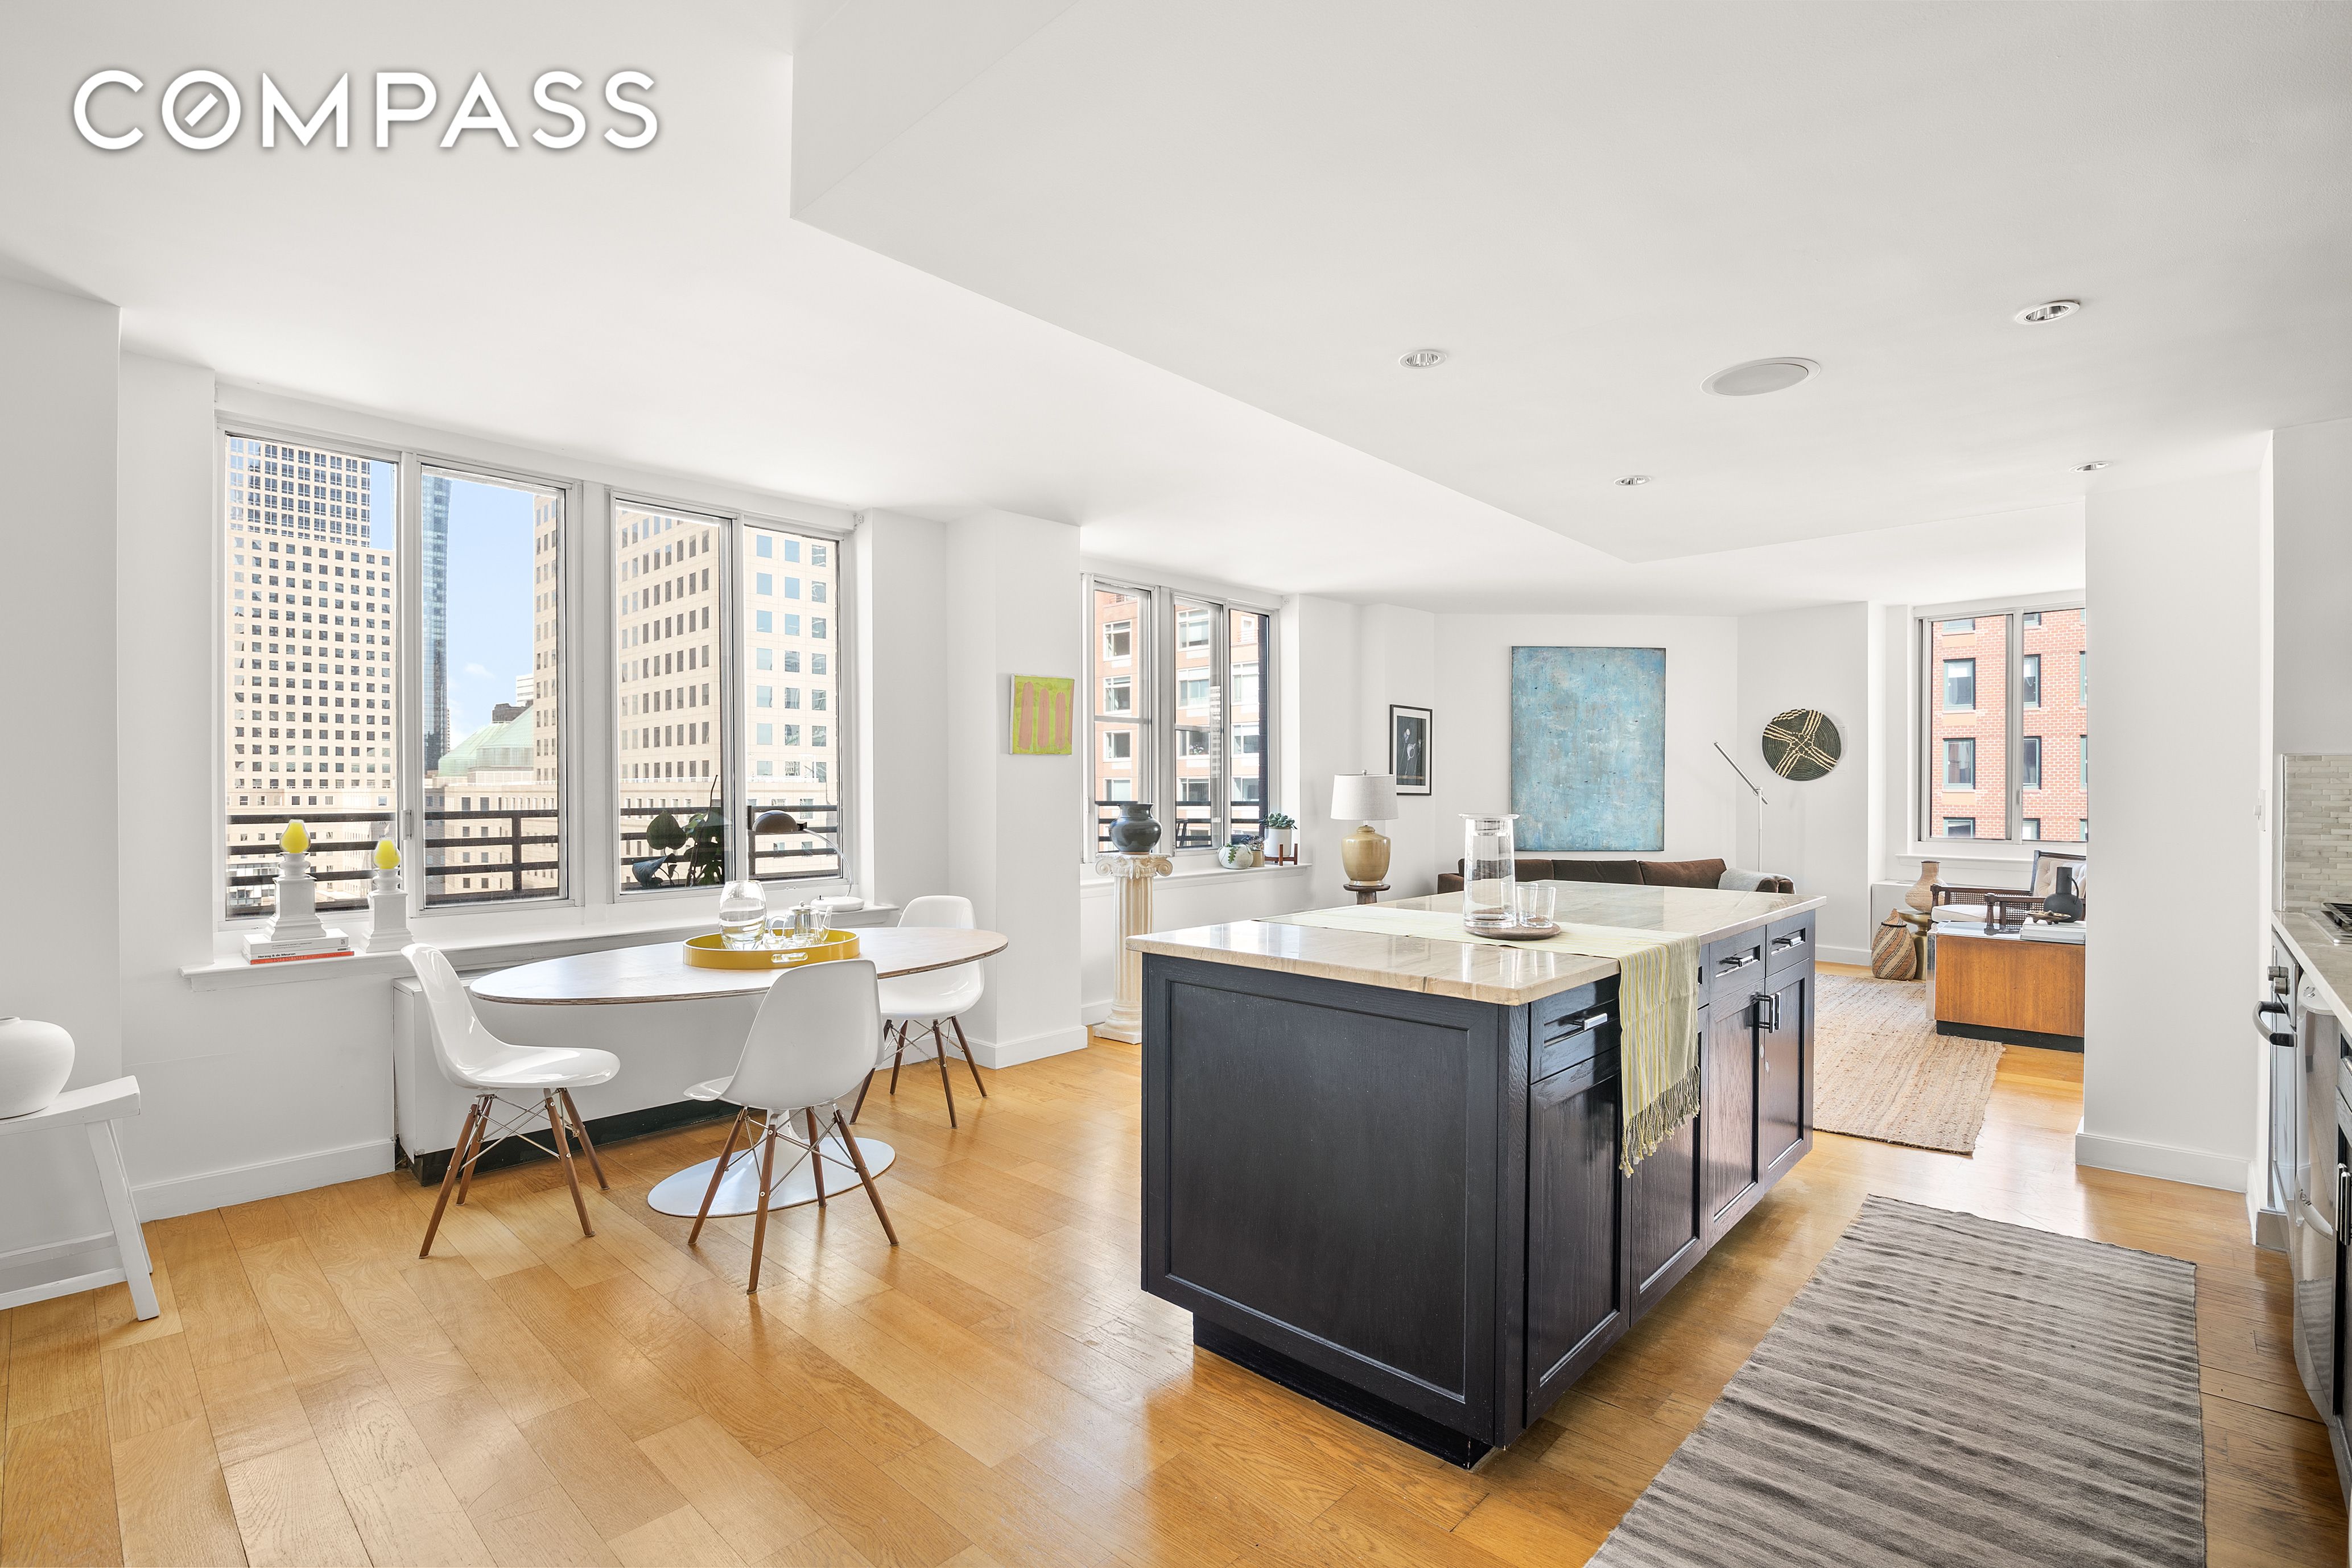 333 Rector Place Ph3e, Battery Park City, Downtown, NYC - 2 Bedrooms  
2 Bathrooms  
4 Rooms - 